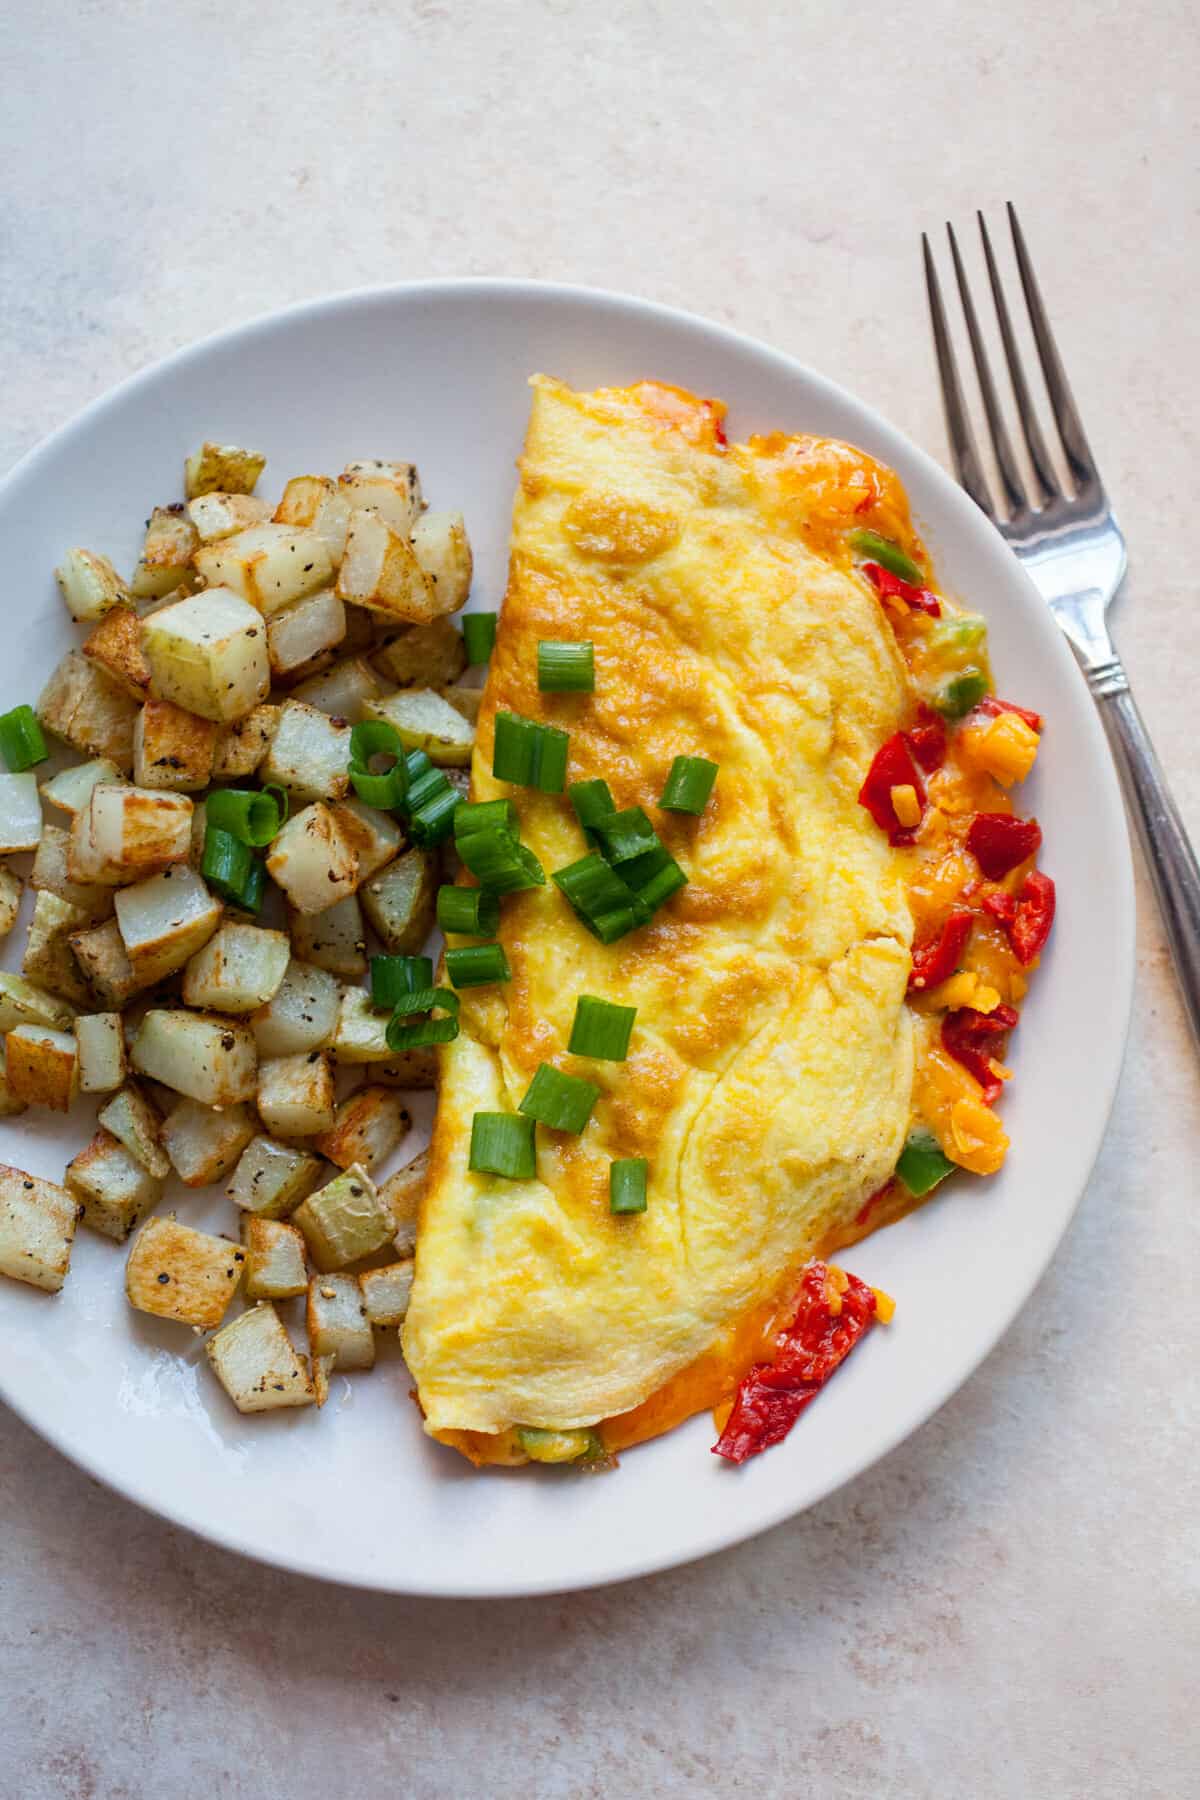 Pimento Cheese Omelet: An easy homemade pimento cheese spread folded inside a classic omelet. Your new favorite weekend omelet! | macheesmo.com